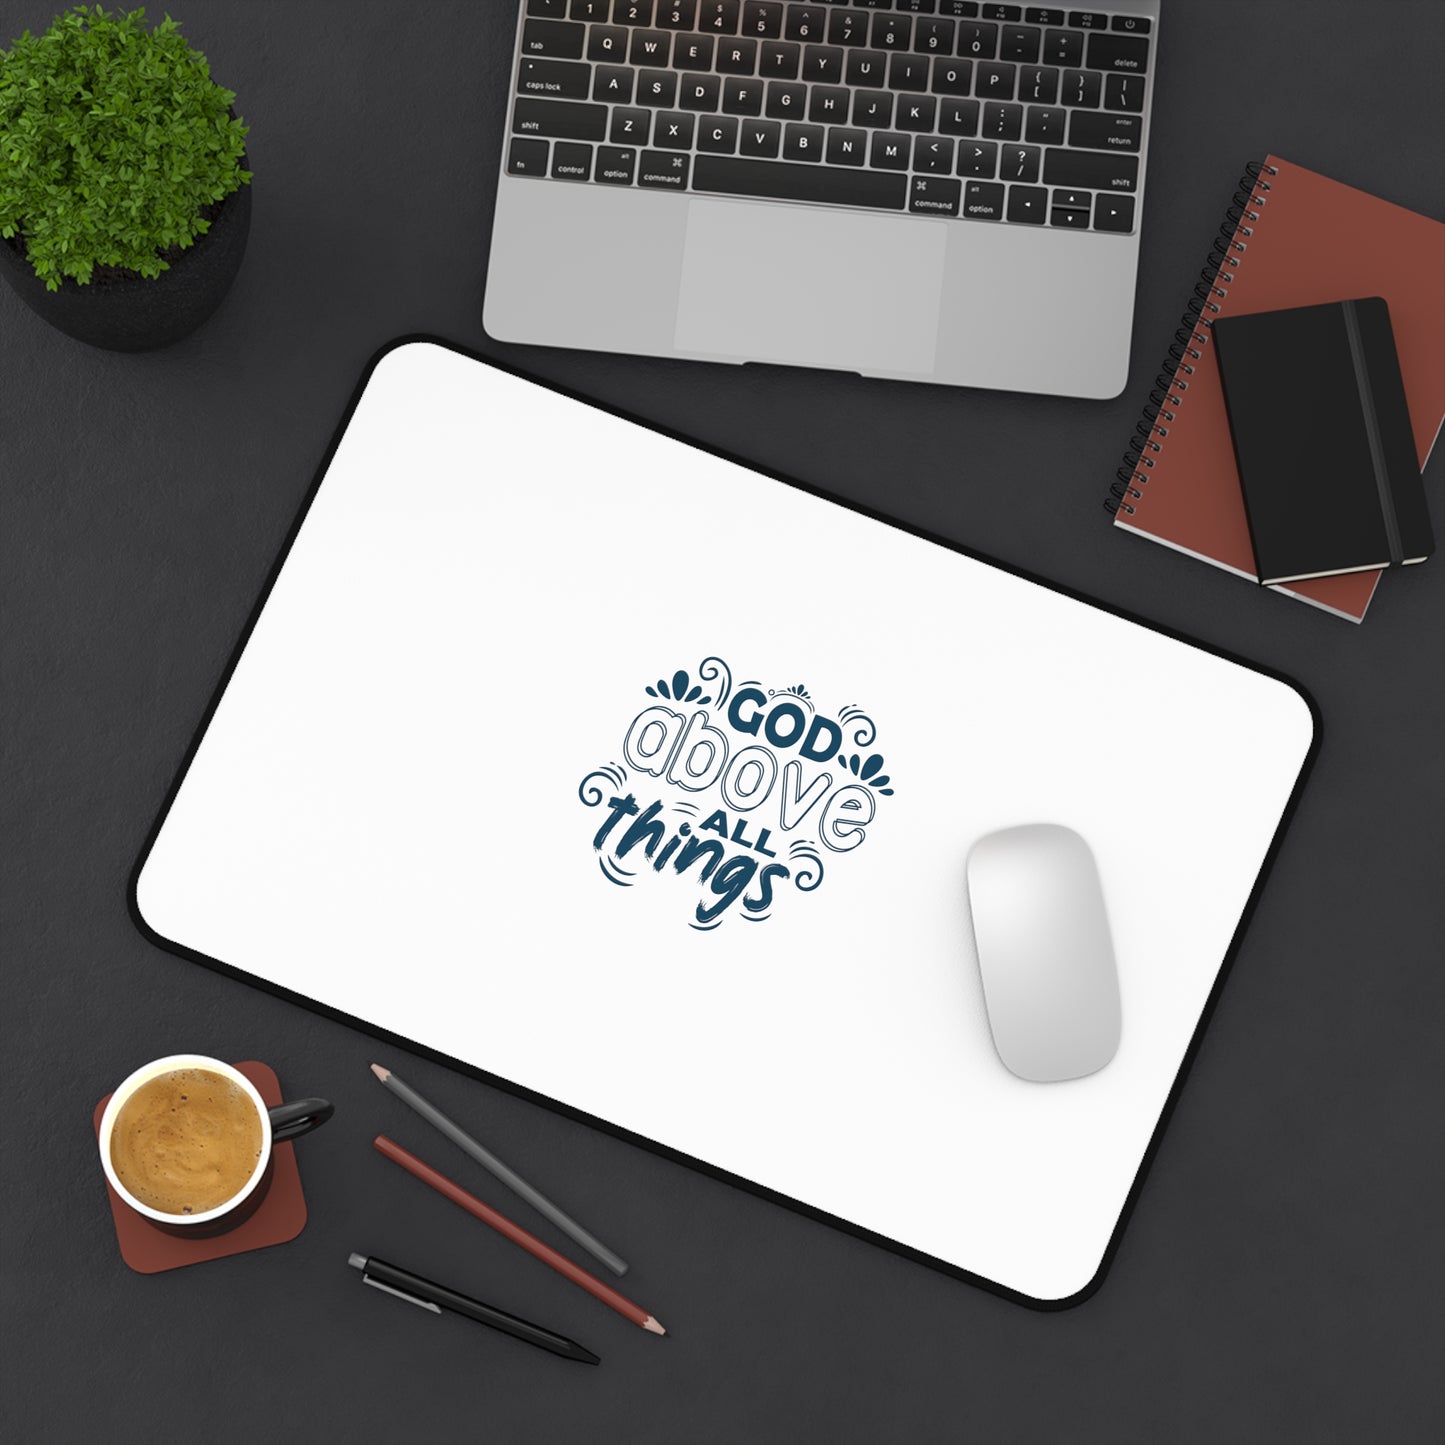 God Above All Things Christian Computer Keyboard Mouse Desk Mat